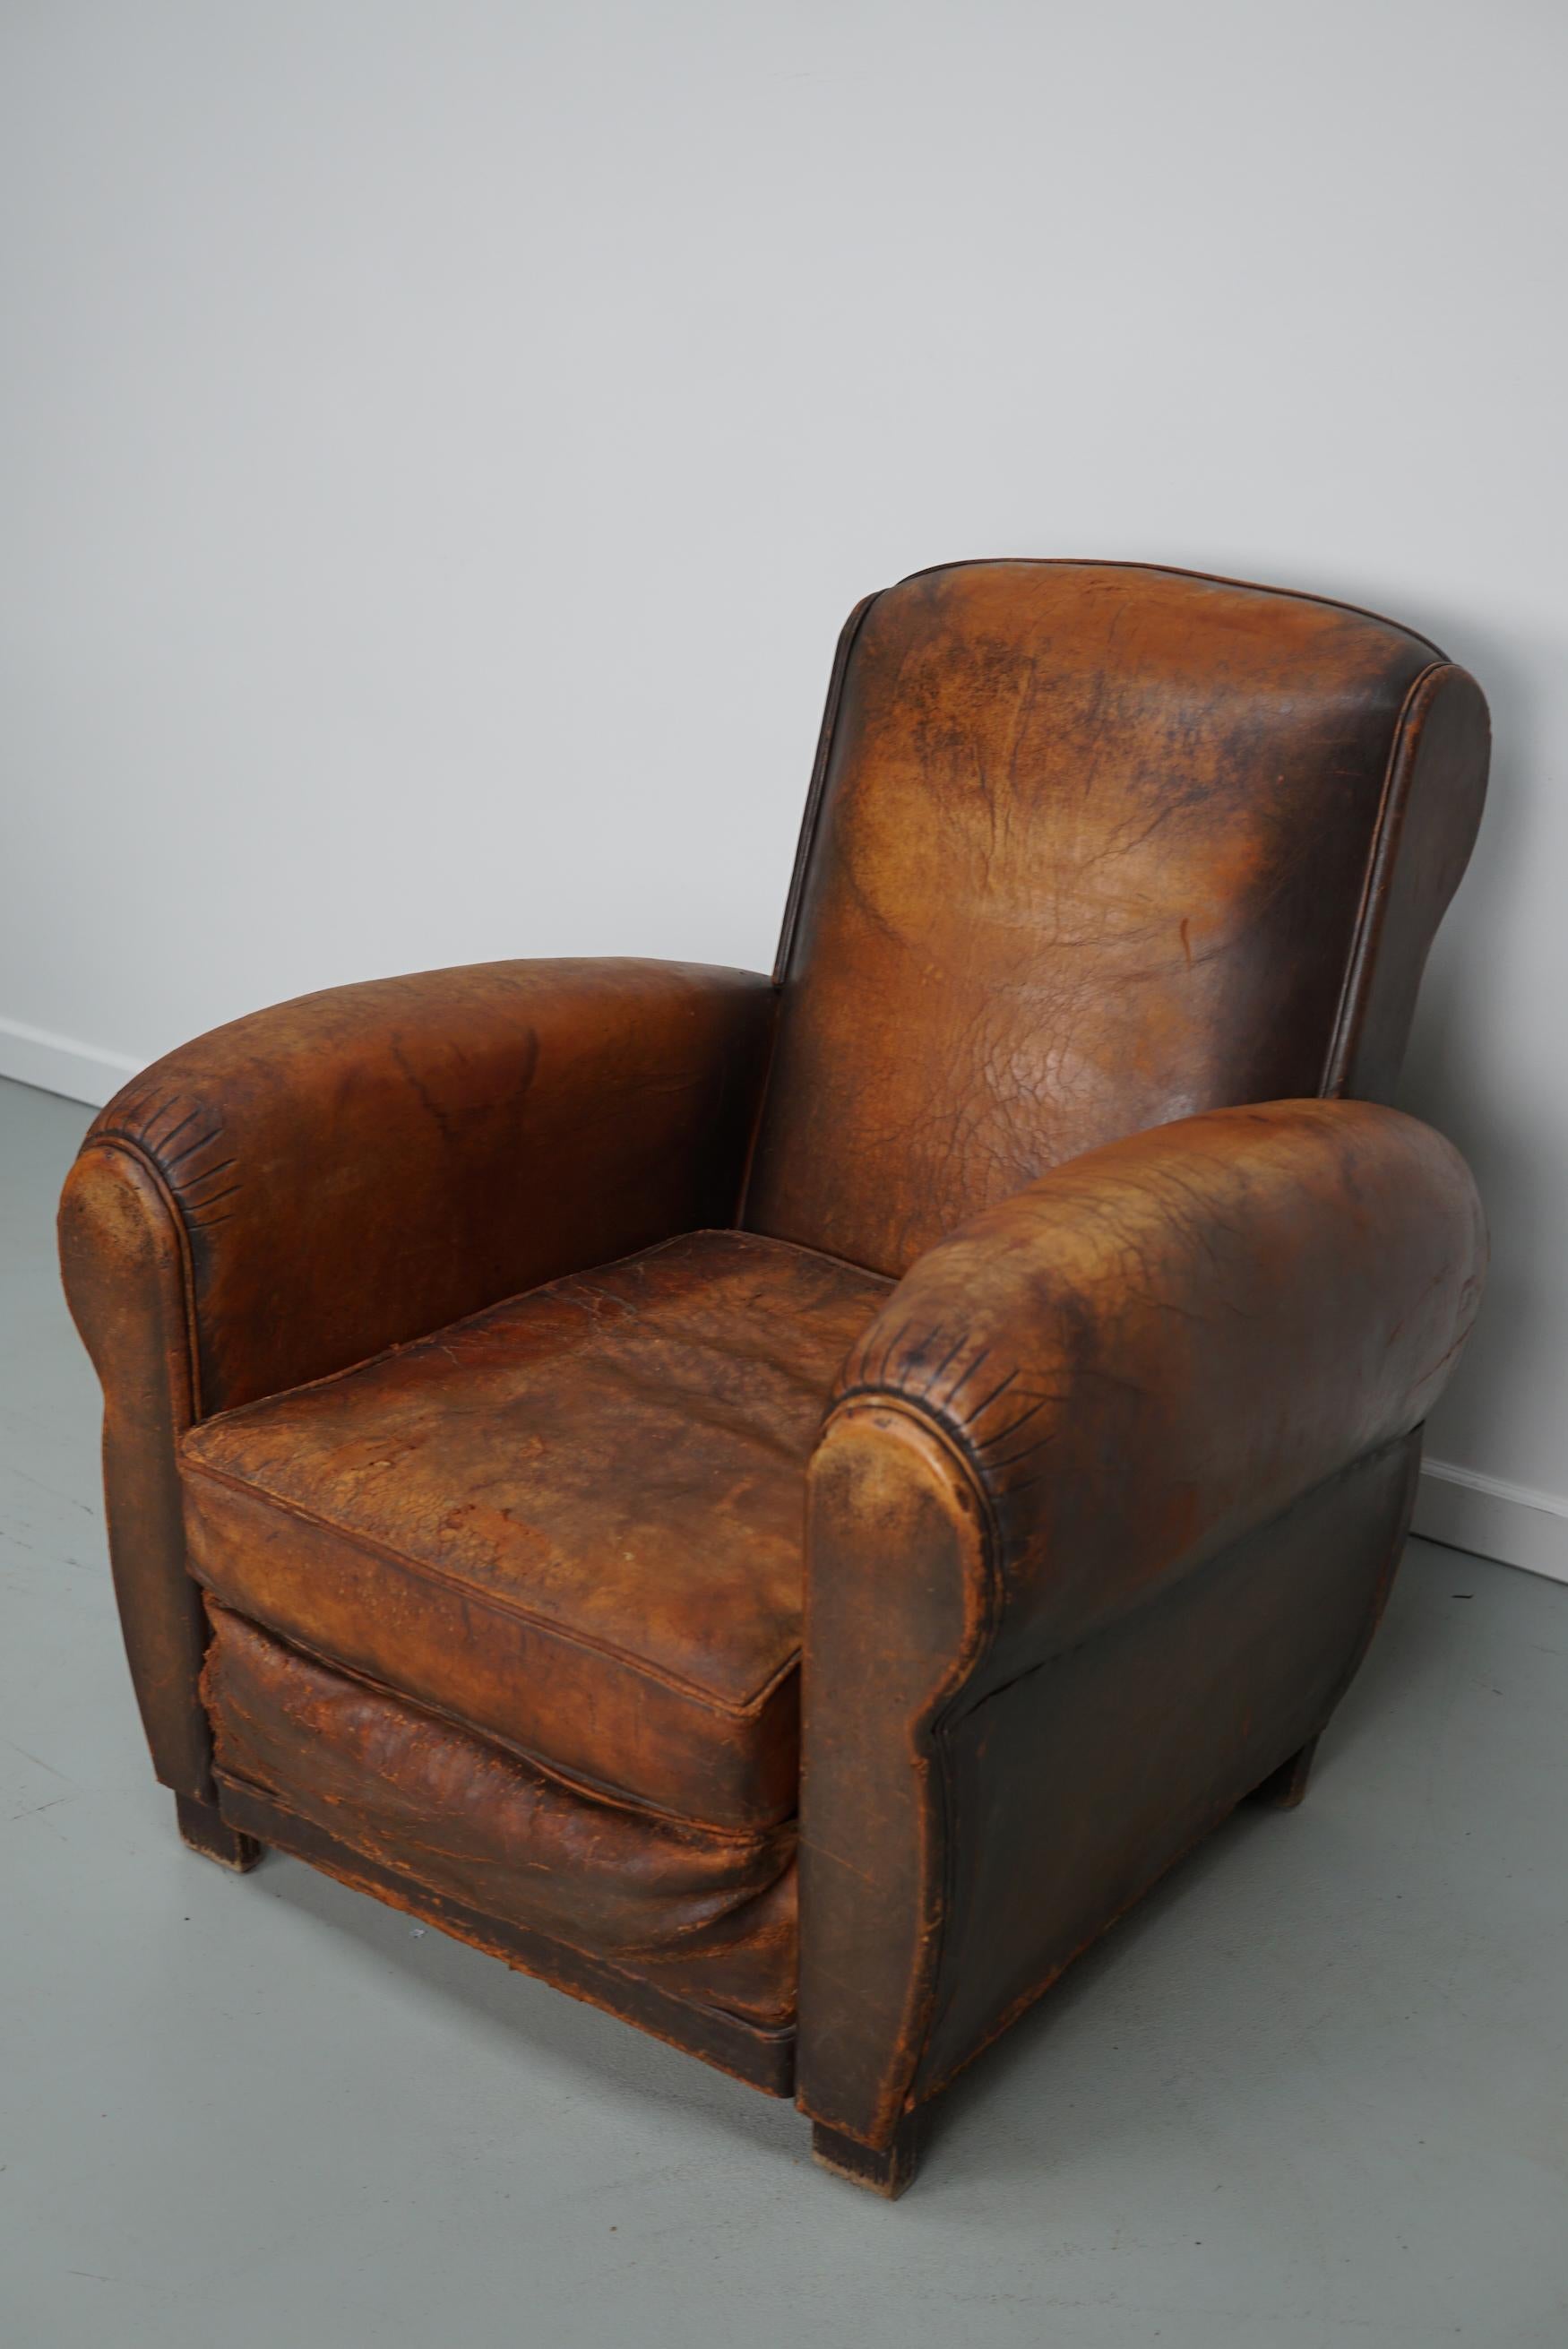 This cognac-colored leather club chair comes from France. It is upholstered with cognac-colored leather and features metal rivets and wooden legs. The springs have been replaced by modern foam so the seat is in good condition.